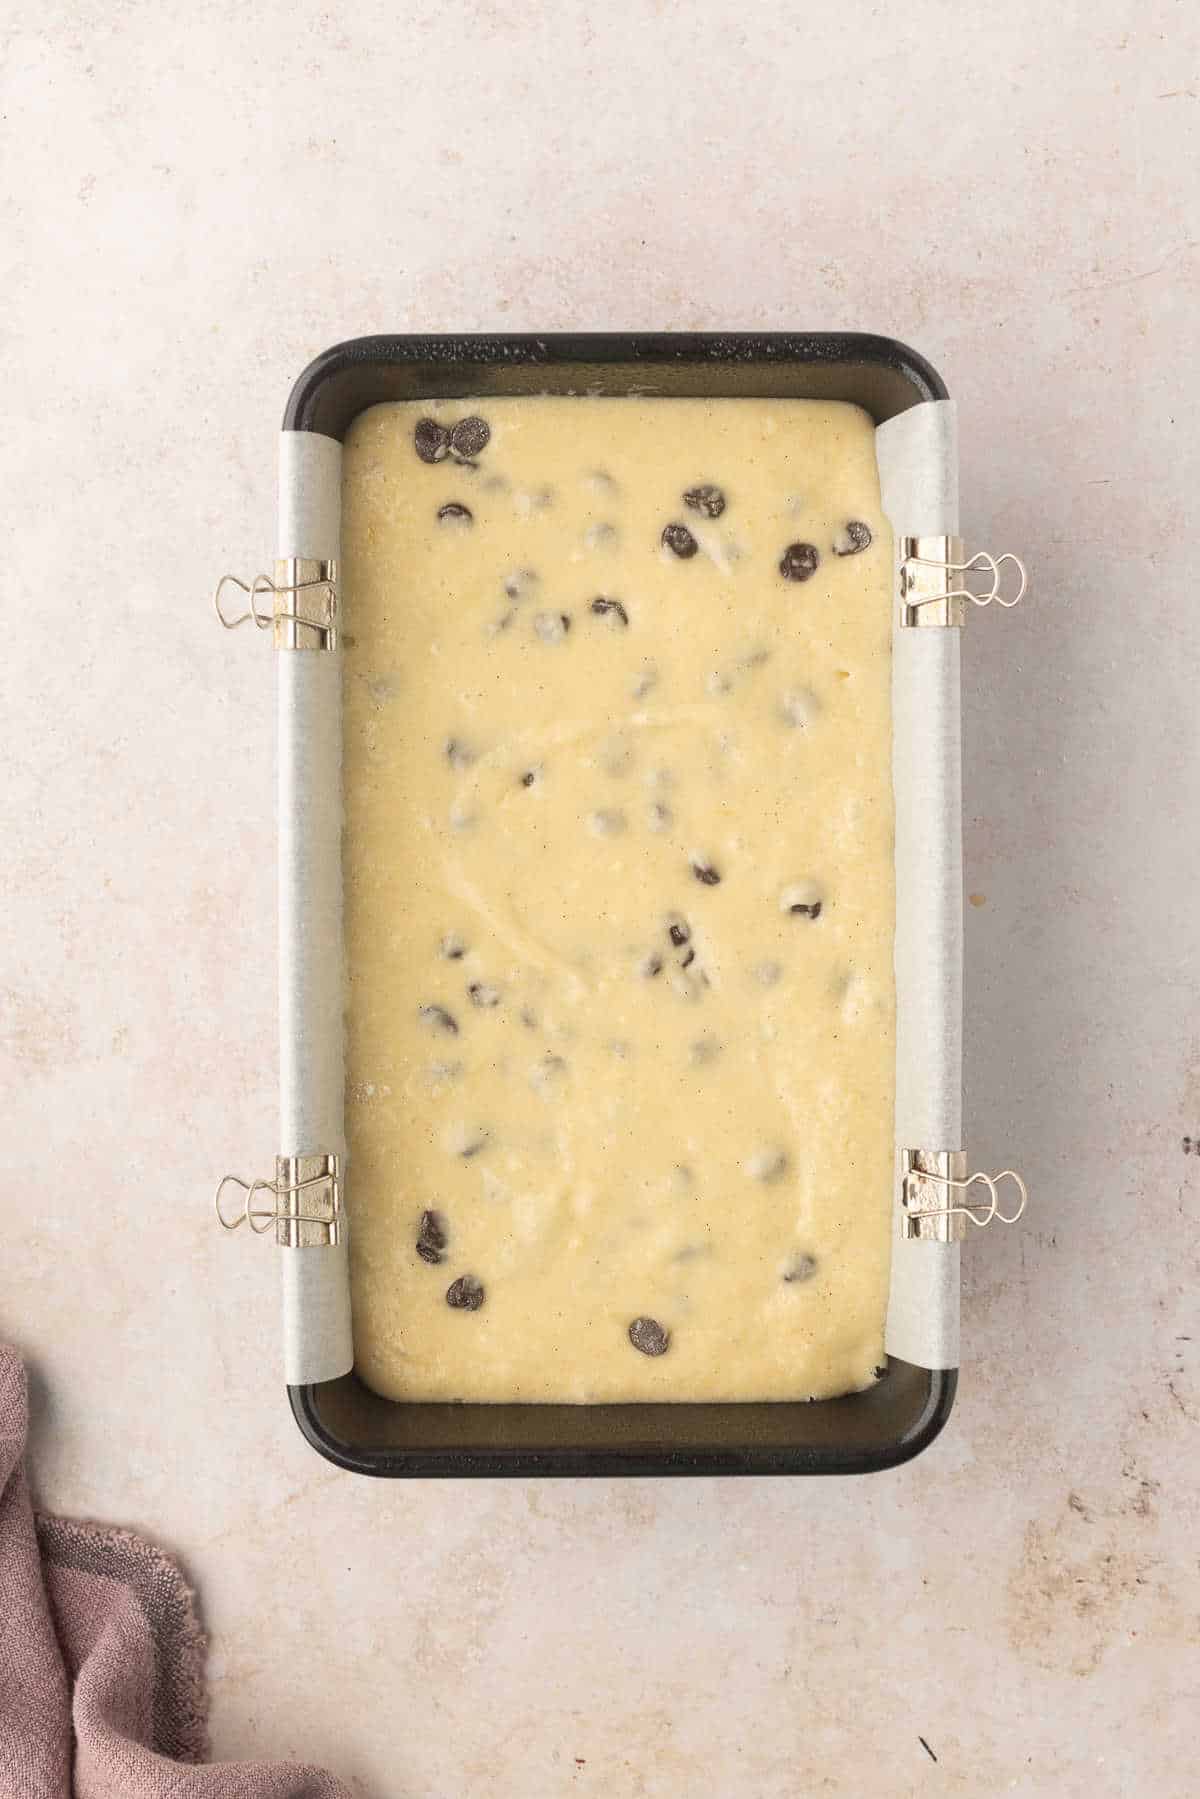 Chocolate chip loaf cake batter in a loaf pan.